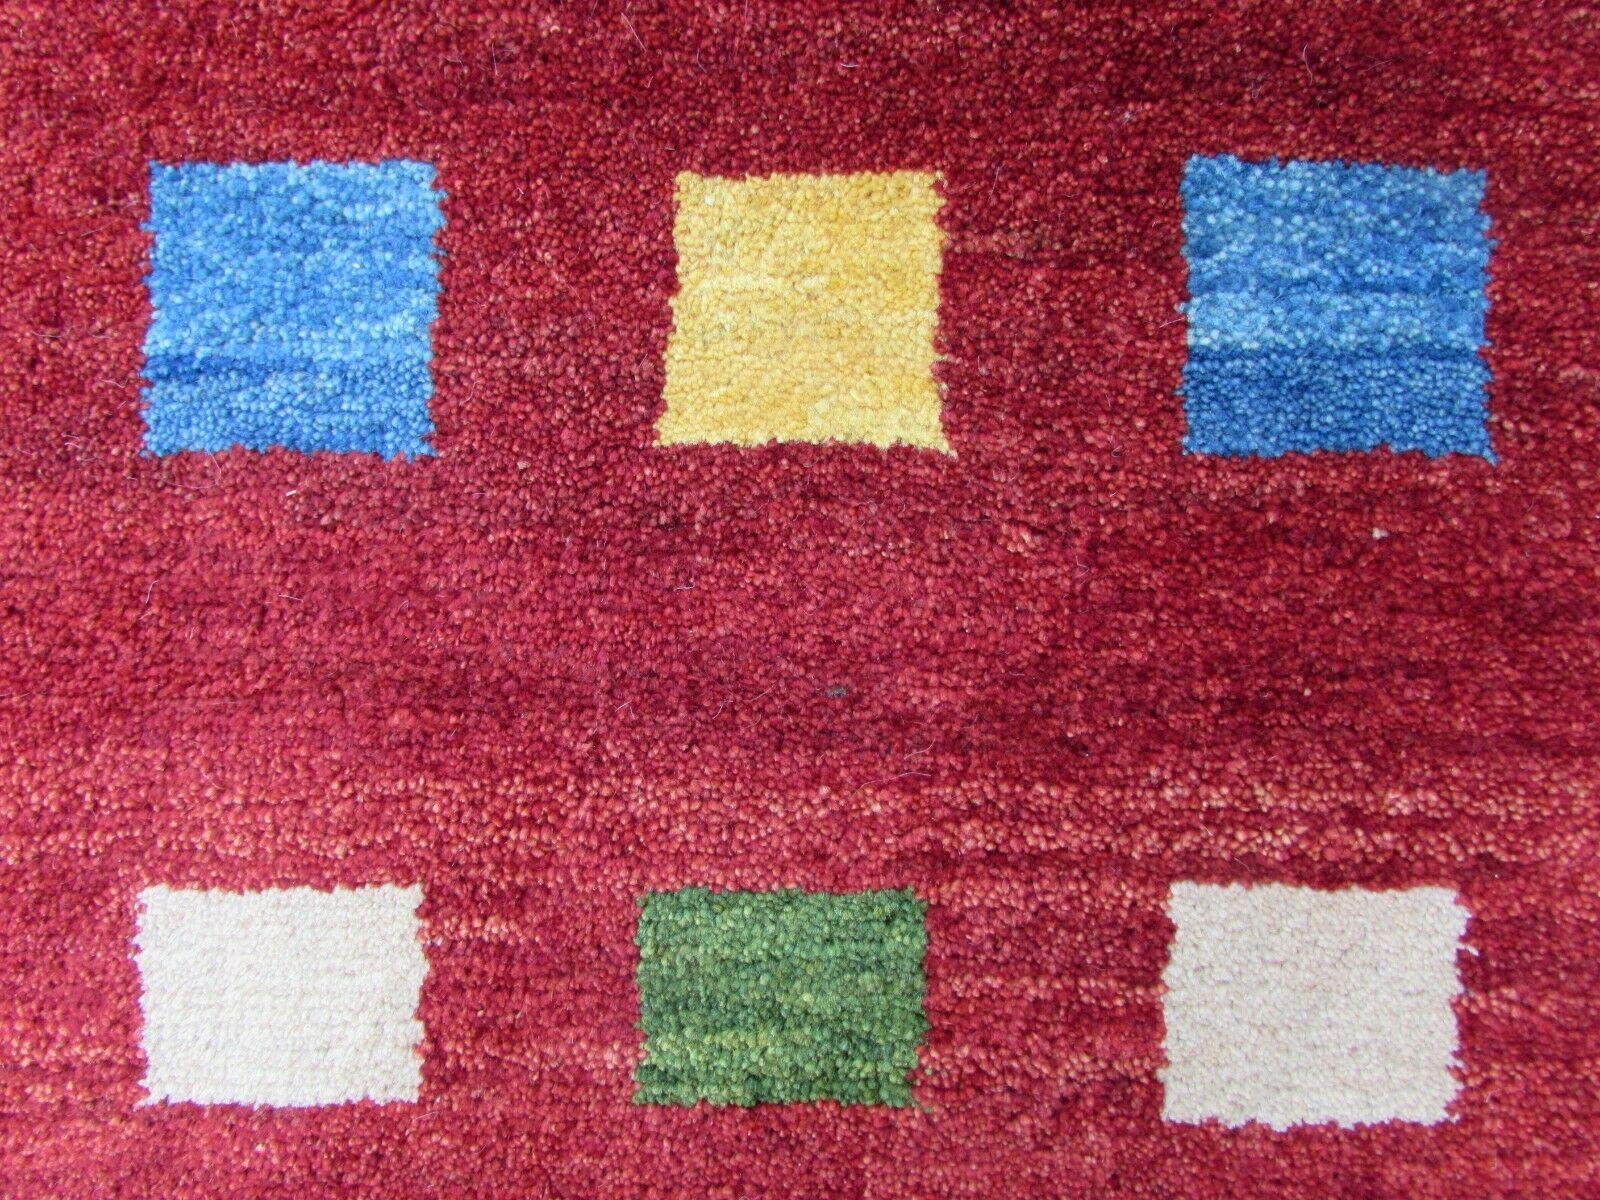 Handmade vintage Gabbeh rug in geometric design. The rug is from the end of 20th century in original good condition.

- Condition: original good,

- circa 1980s,

- Size: 3.5' x 4.9' (106cm x 150cm),

- Material: wool,

- Country of